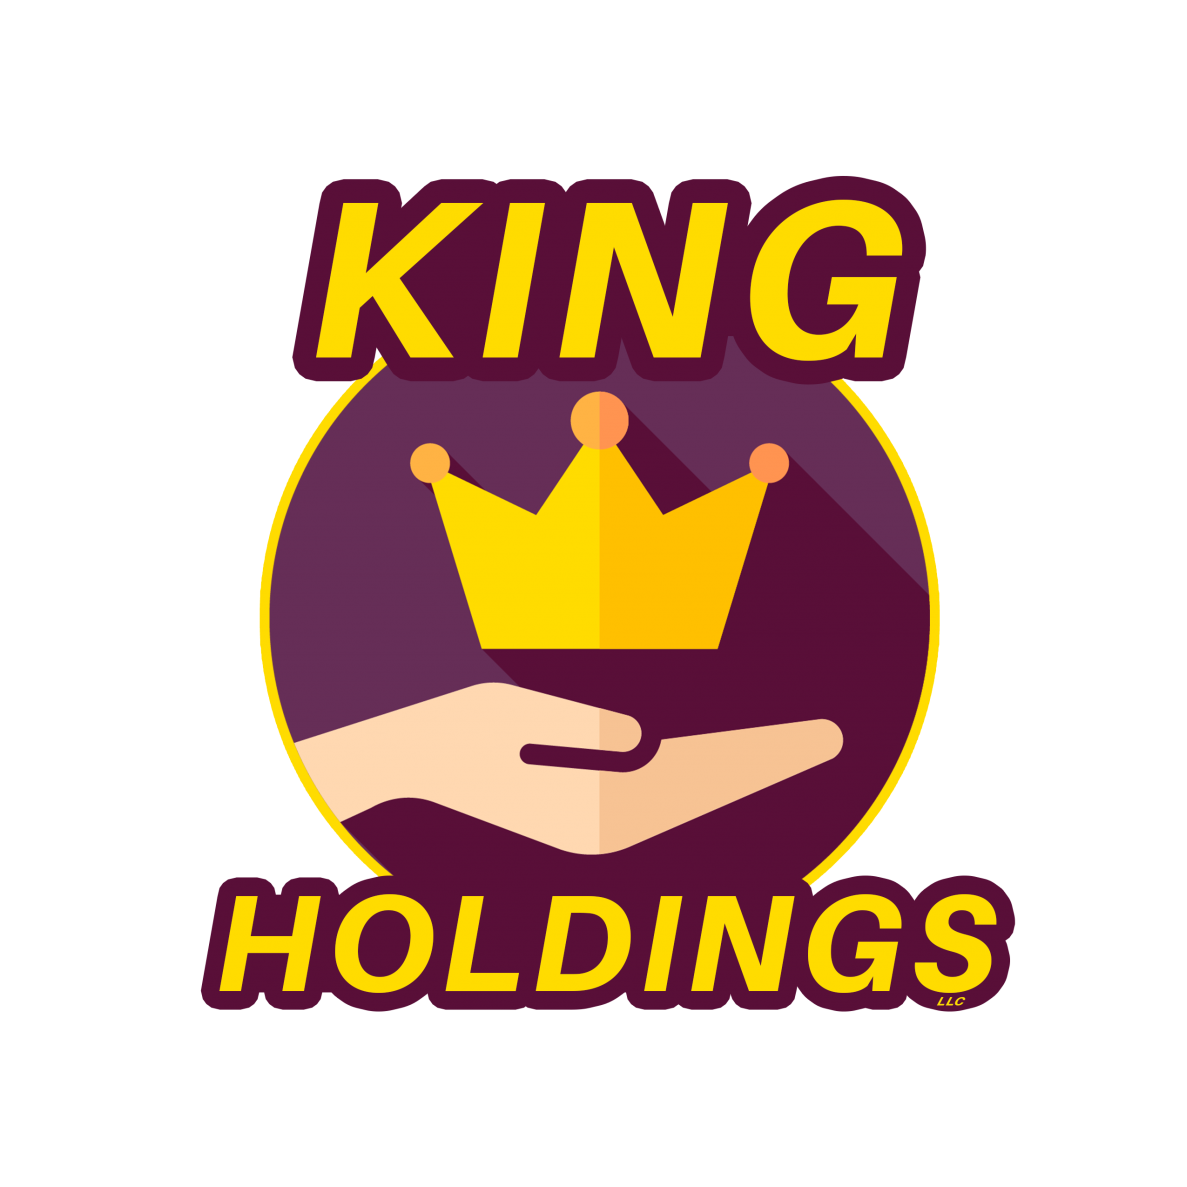 King Holding's